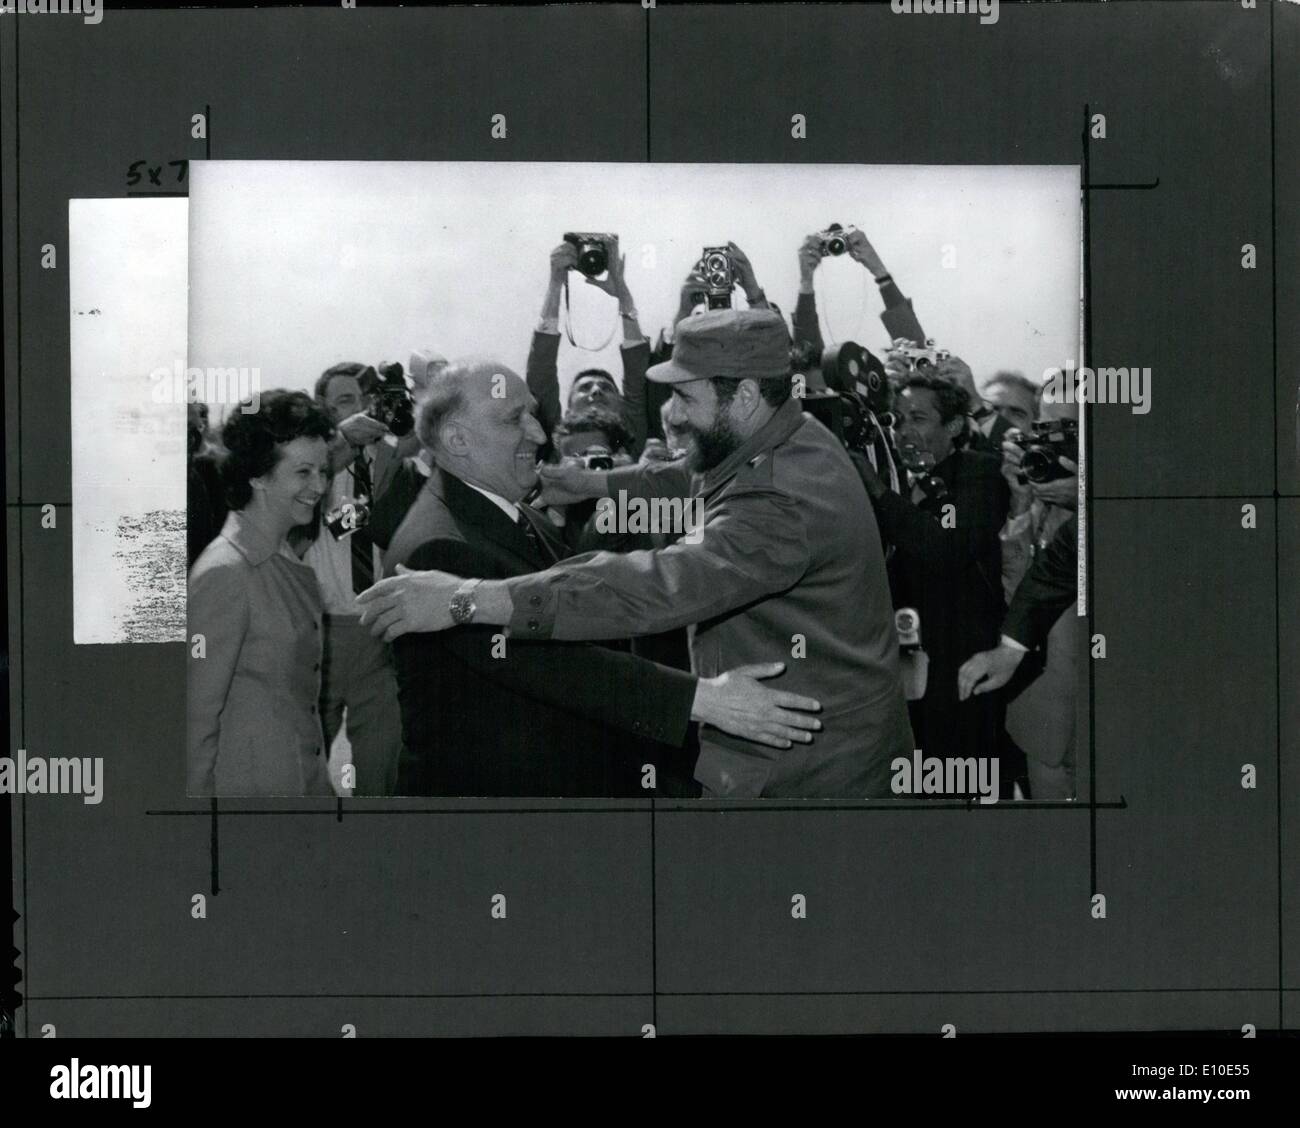 May 05, 1972 - The Cuban party and government delegation, headed by Major Fidel Castro, Prime Minister of the Revolutionary Government and First Secretary of the Cuban Communist Party , arrived in Sofia. Photo shows Tedor Zhivkov, First secretary of the Central Committee of the State of Bulgaria embraces Major Fidel Castro on his arrival at Sofia airport. Stock Photo